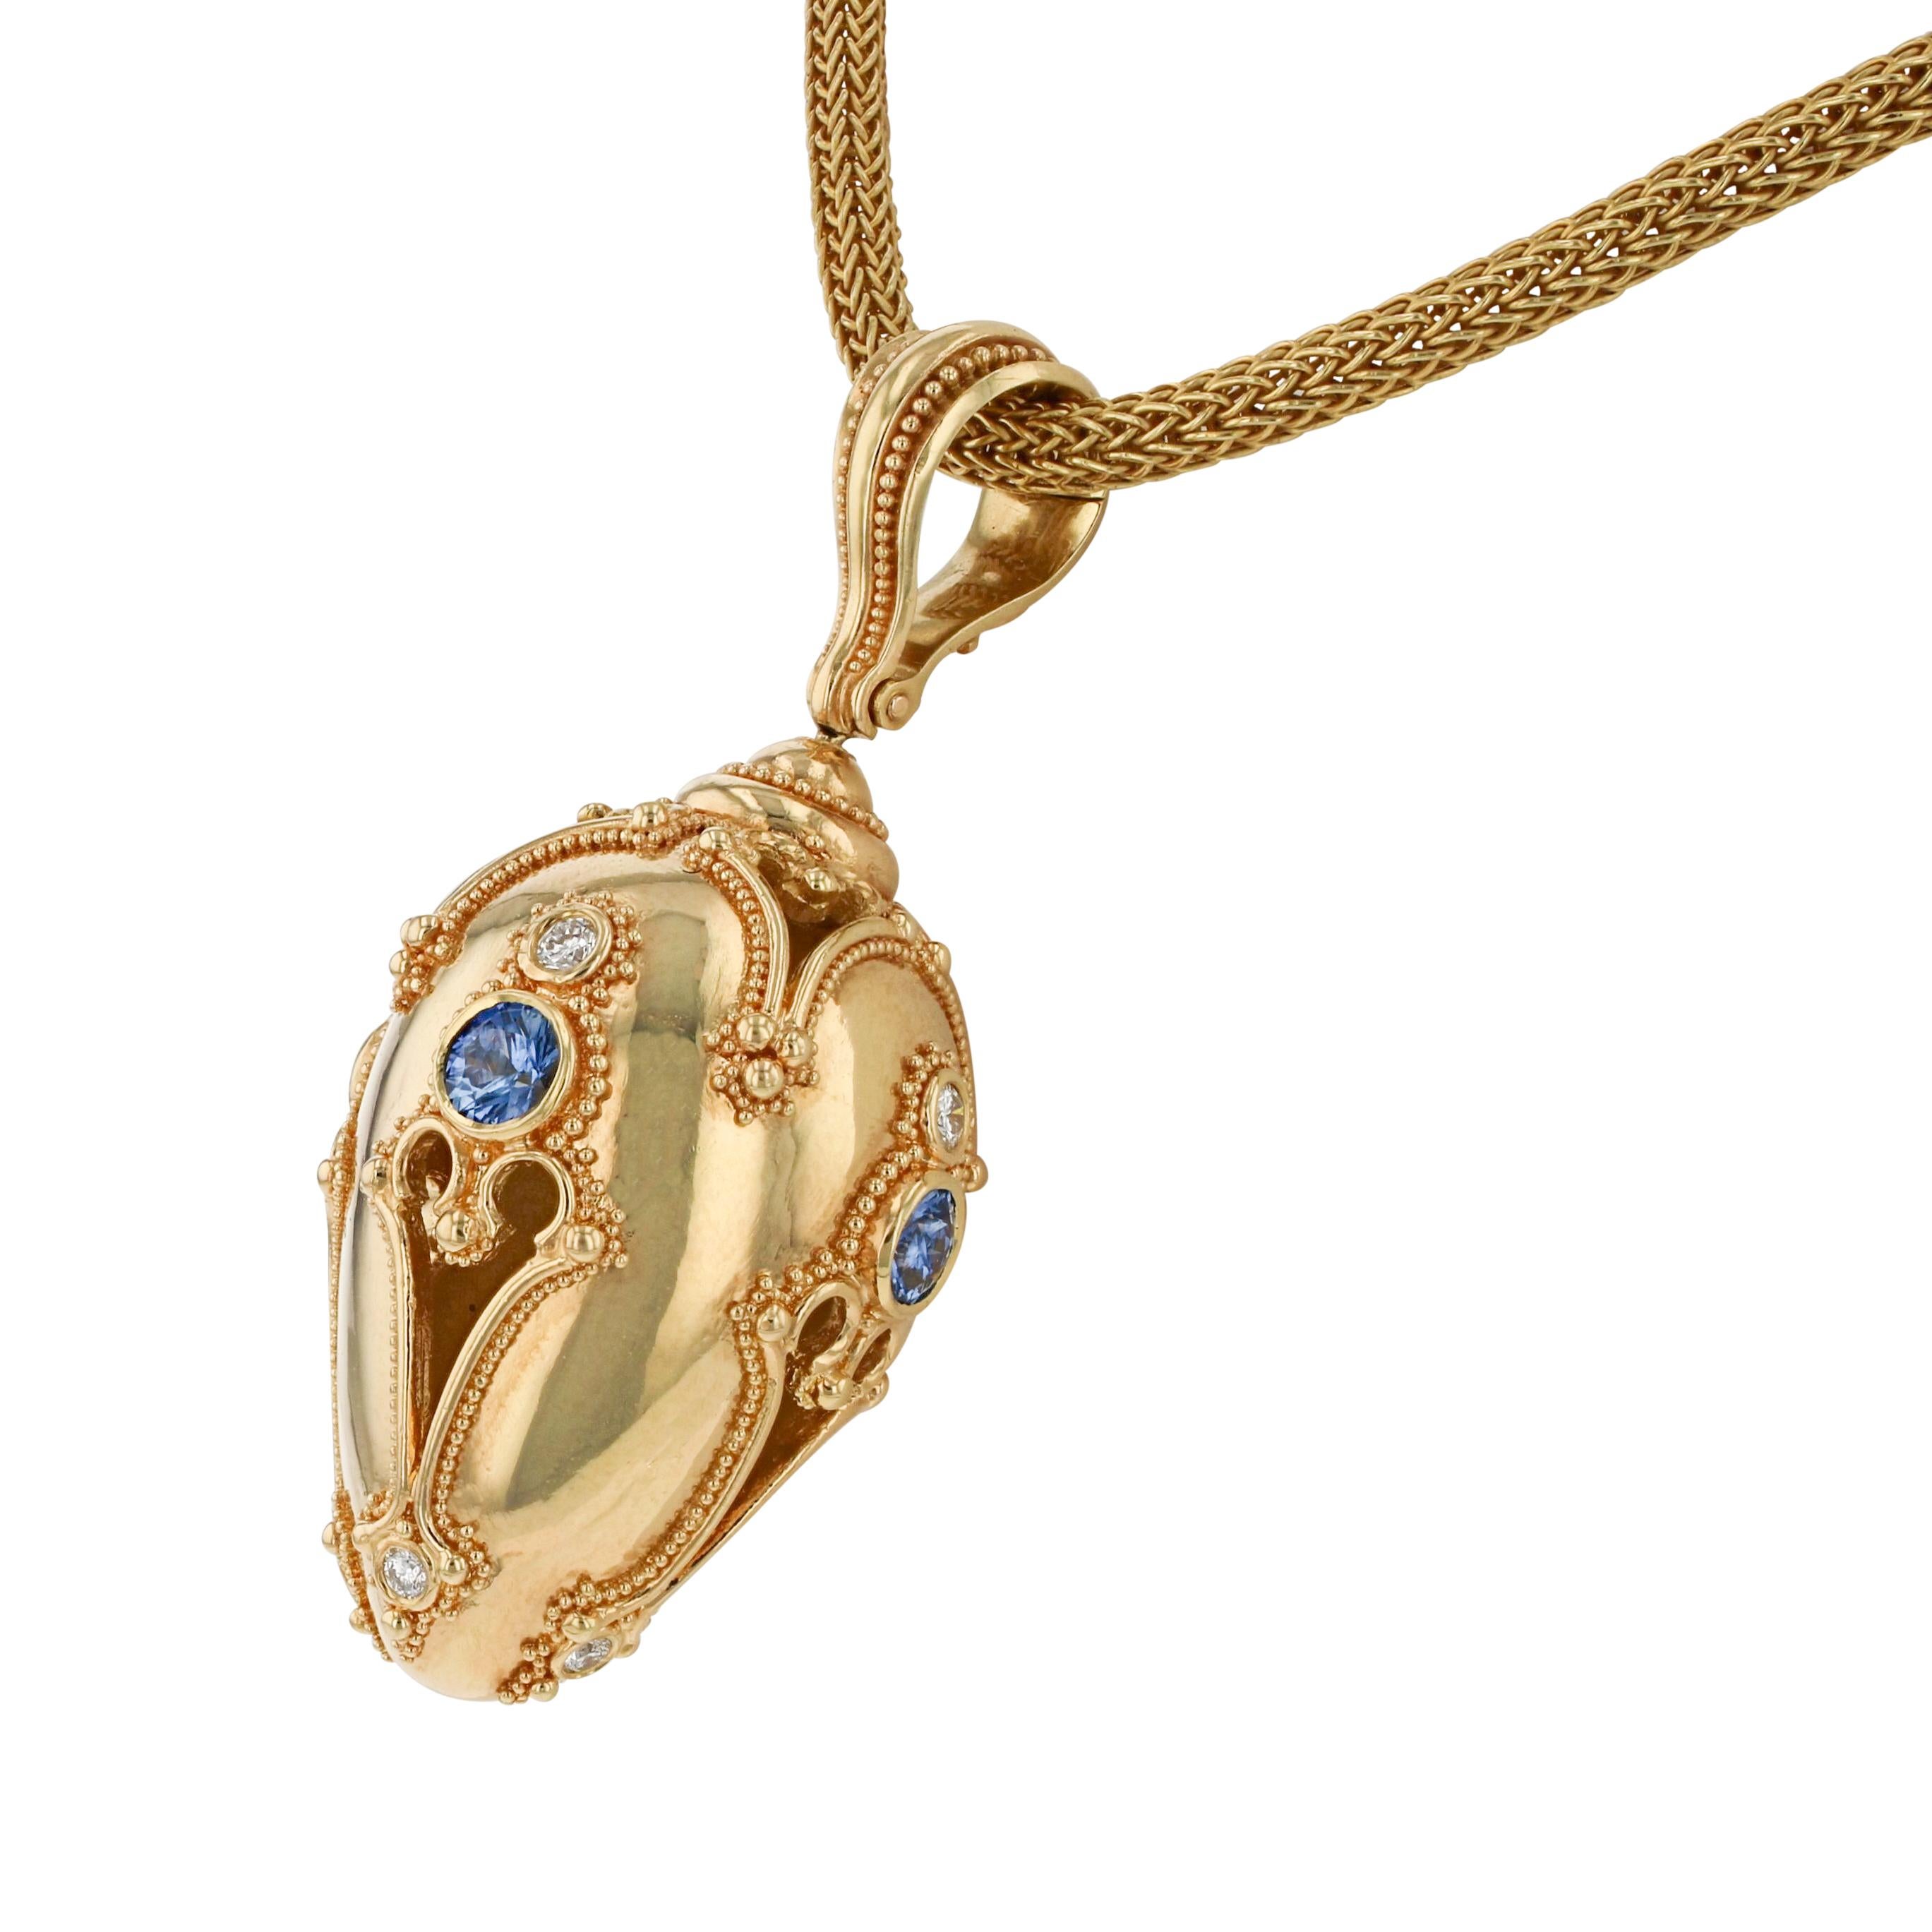 Kent Raible 18 Karat Golden Egg Pendant with Blue Sapphire and Fine Granulation In New Condition For Sale In Mossrock, WA